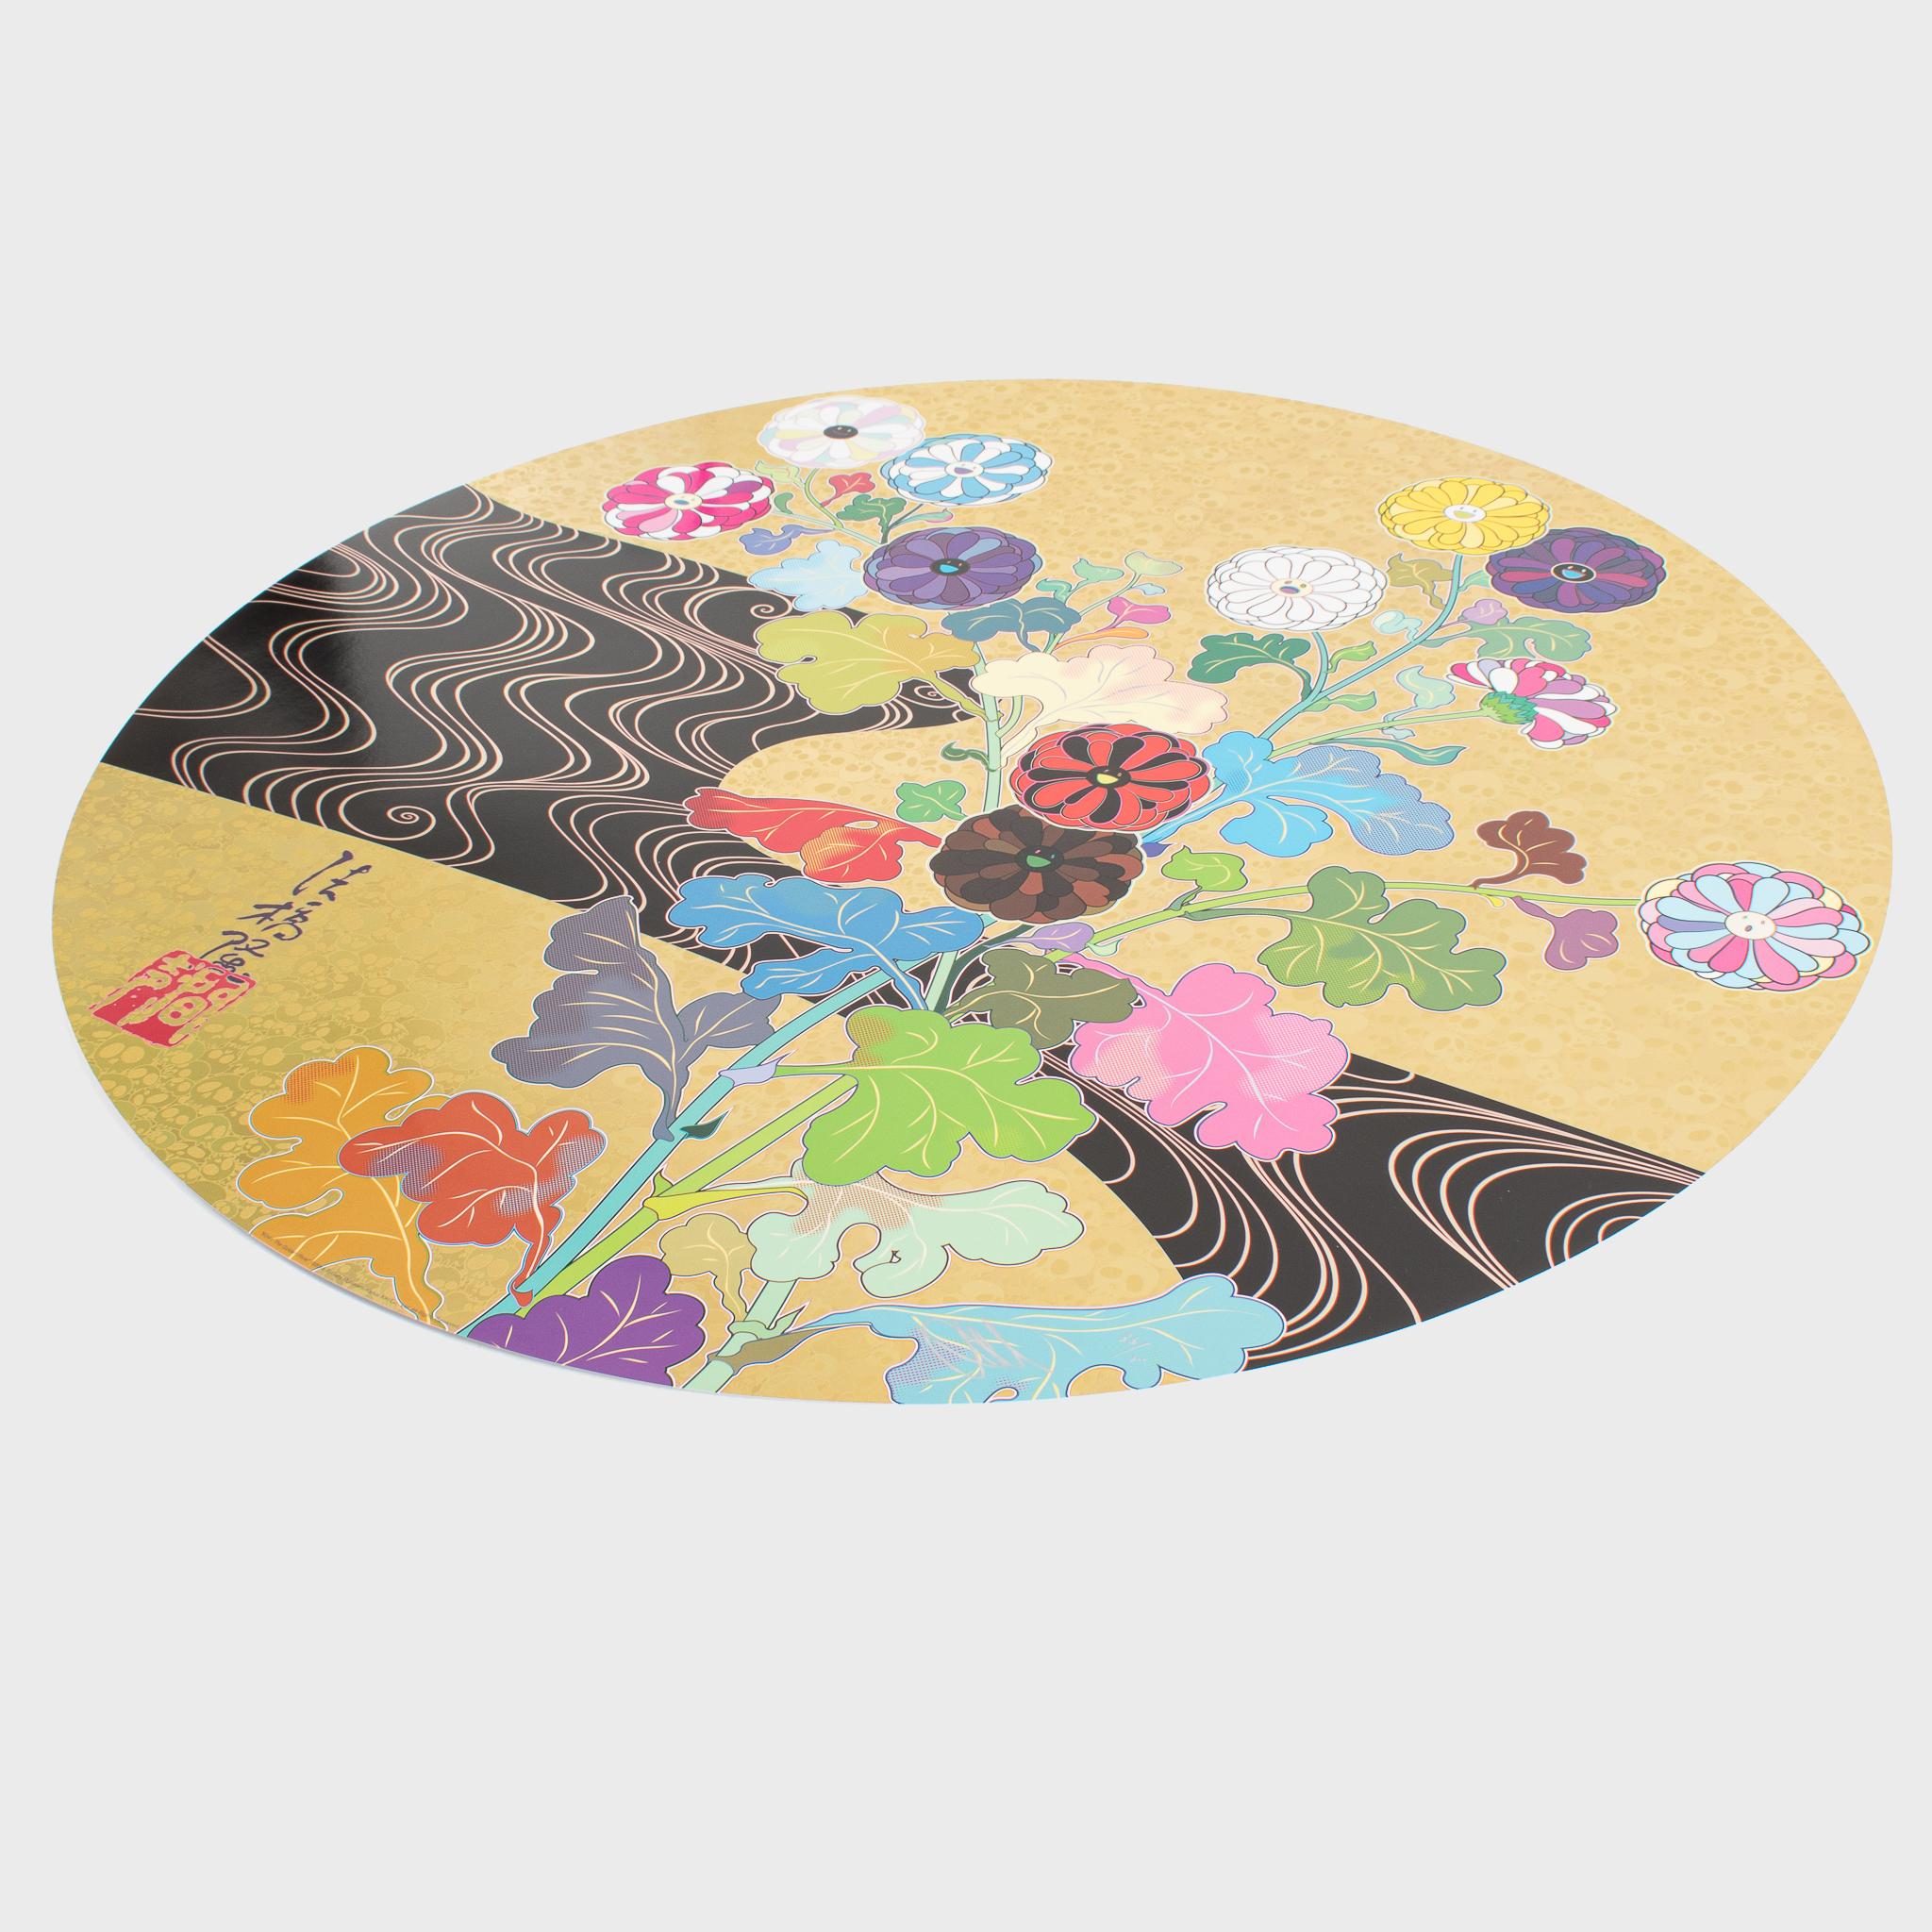 Kōrin: The Golden River - Beige Abstract Print by Takashi Murakami